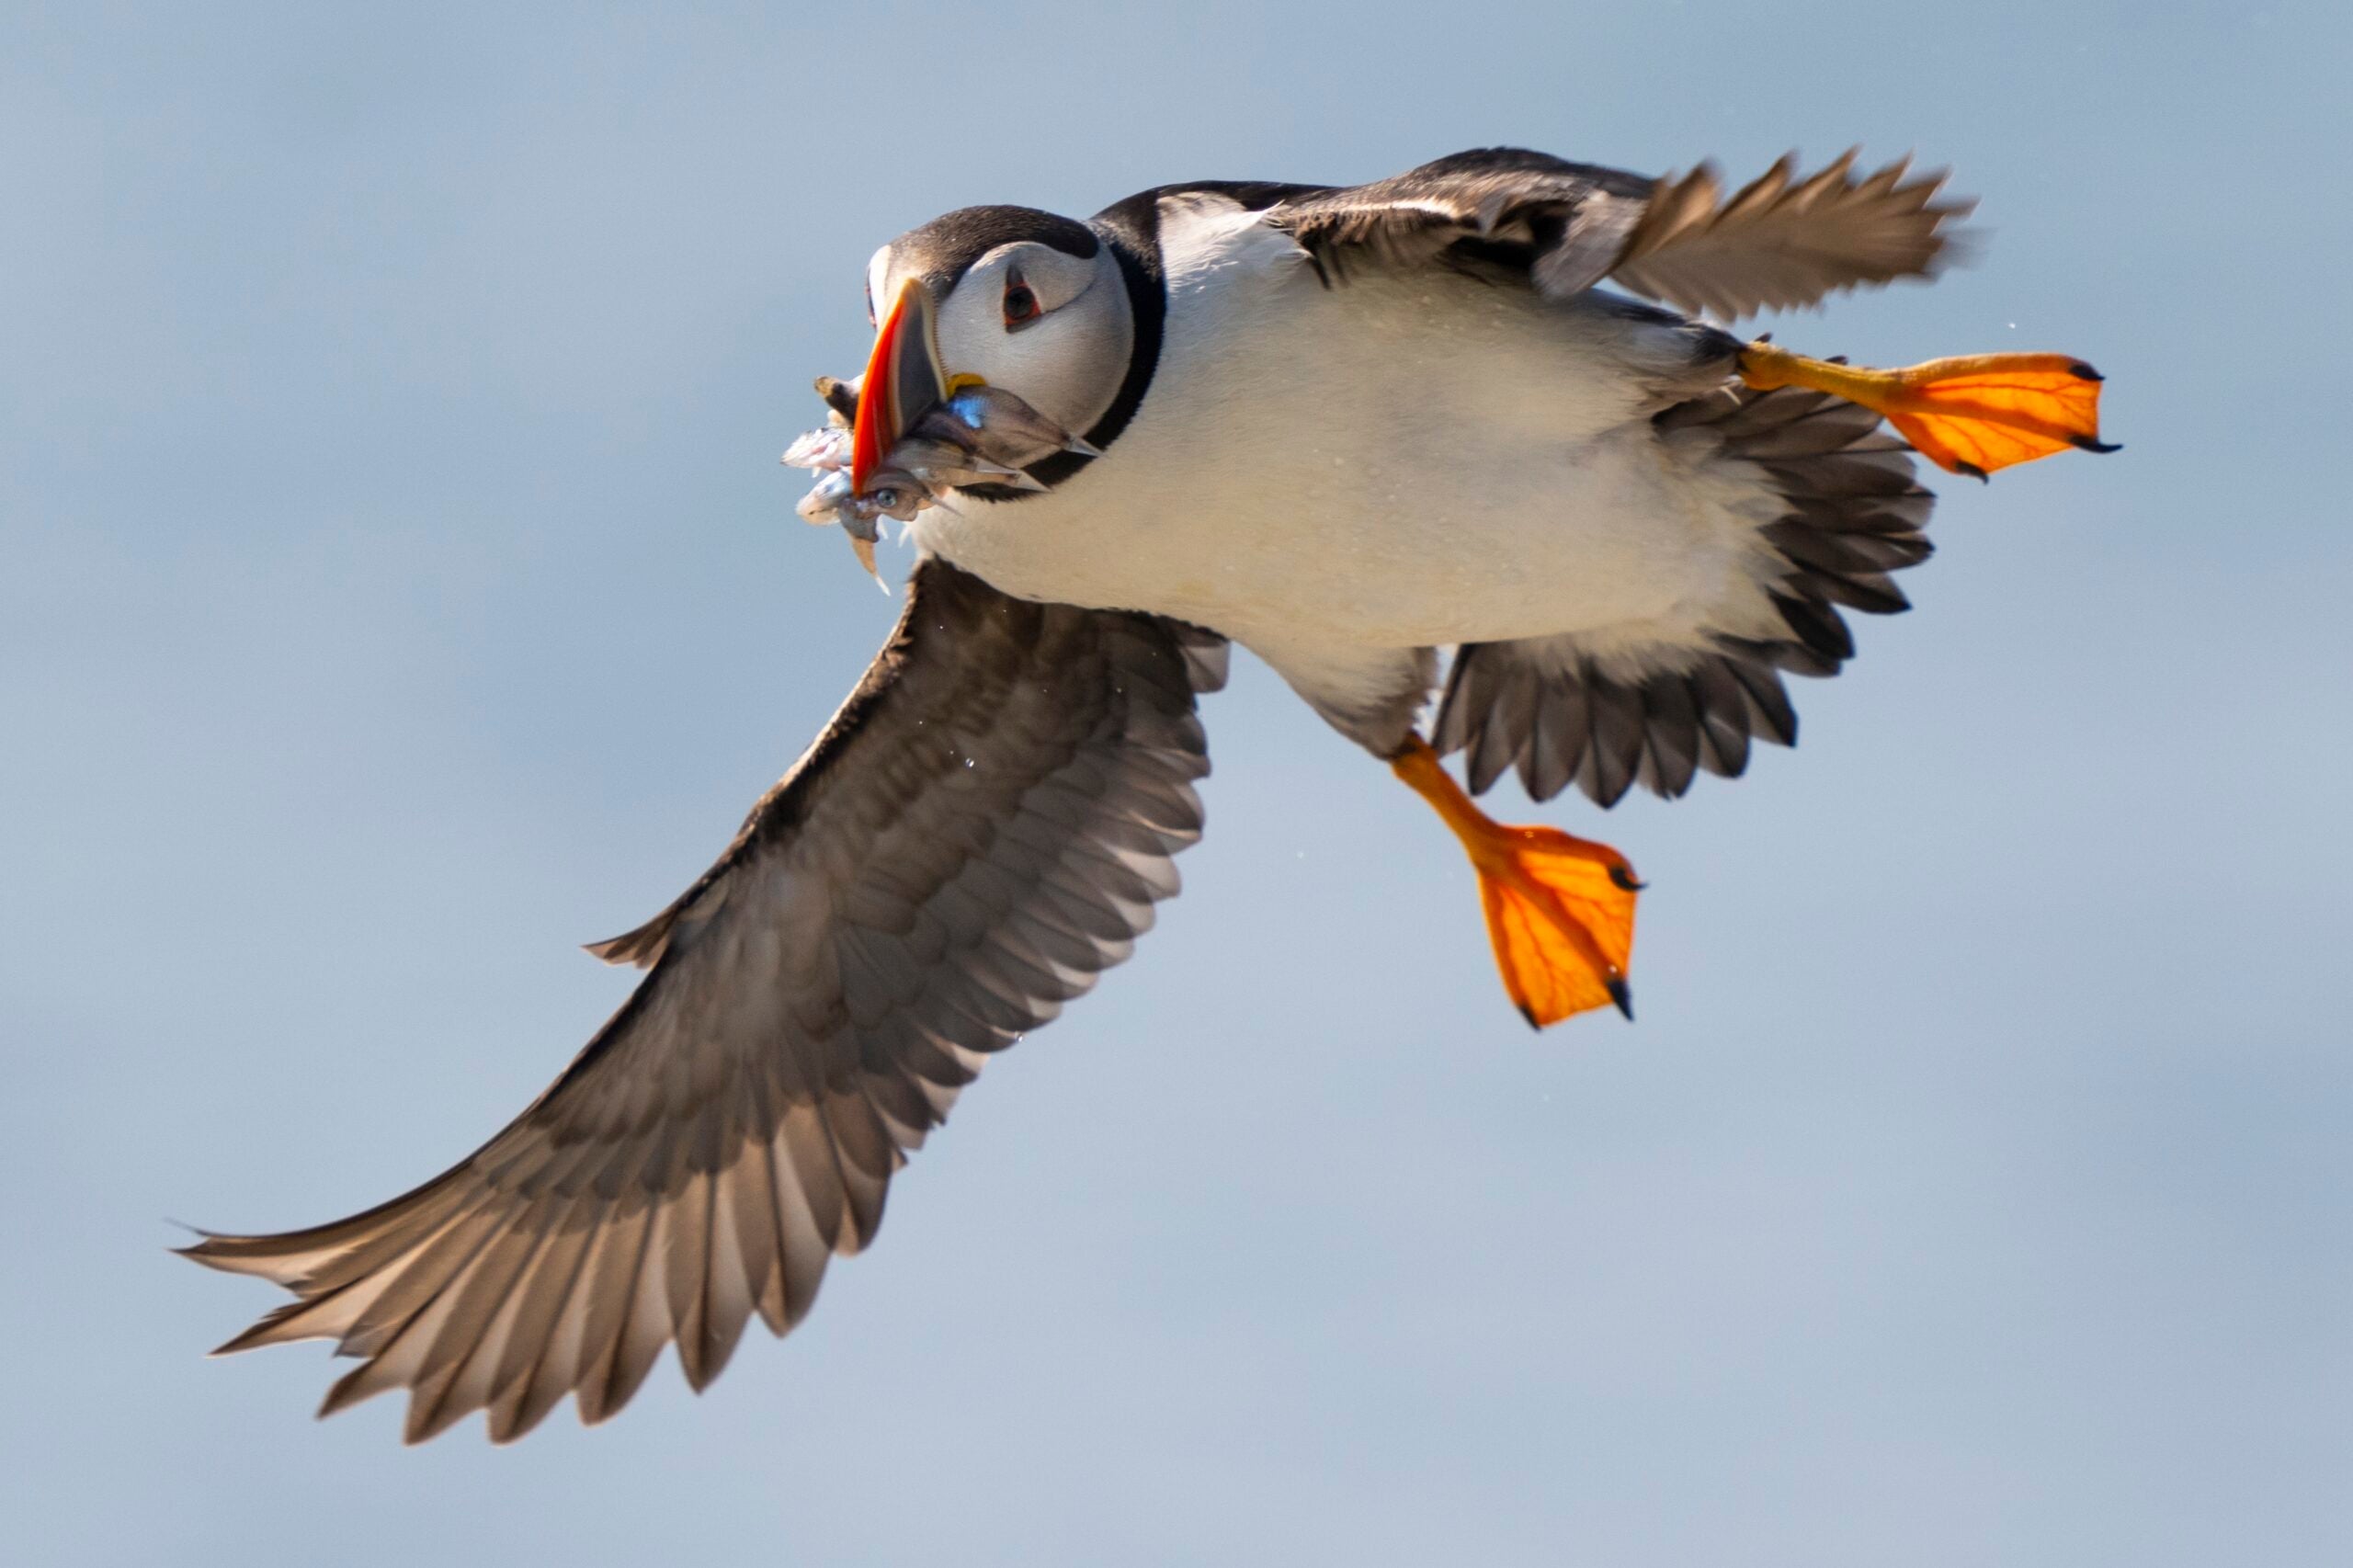 An Atlantic puffin comes in for a landing while bringing in fish to feed its chick.